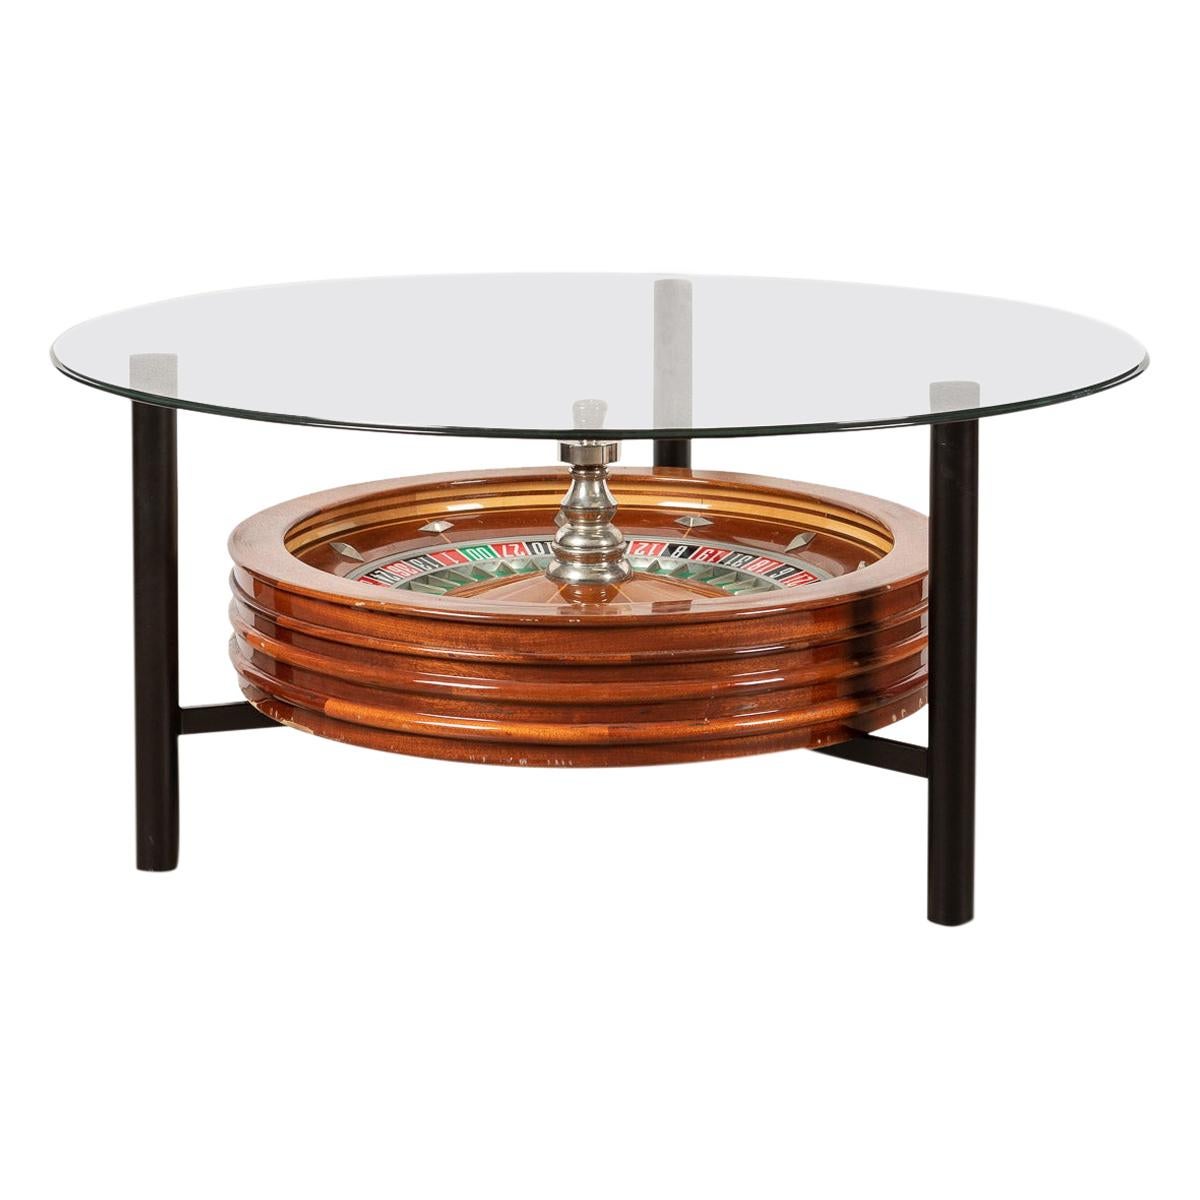 20th Century Novelty Coffee Table with a Working Roulette Wheel